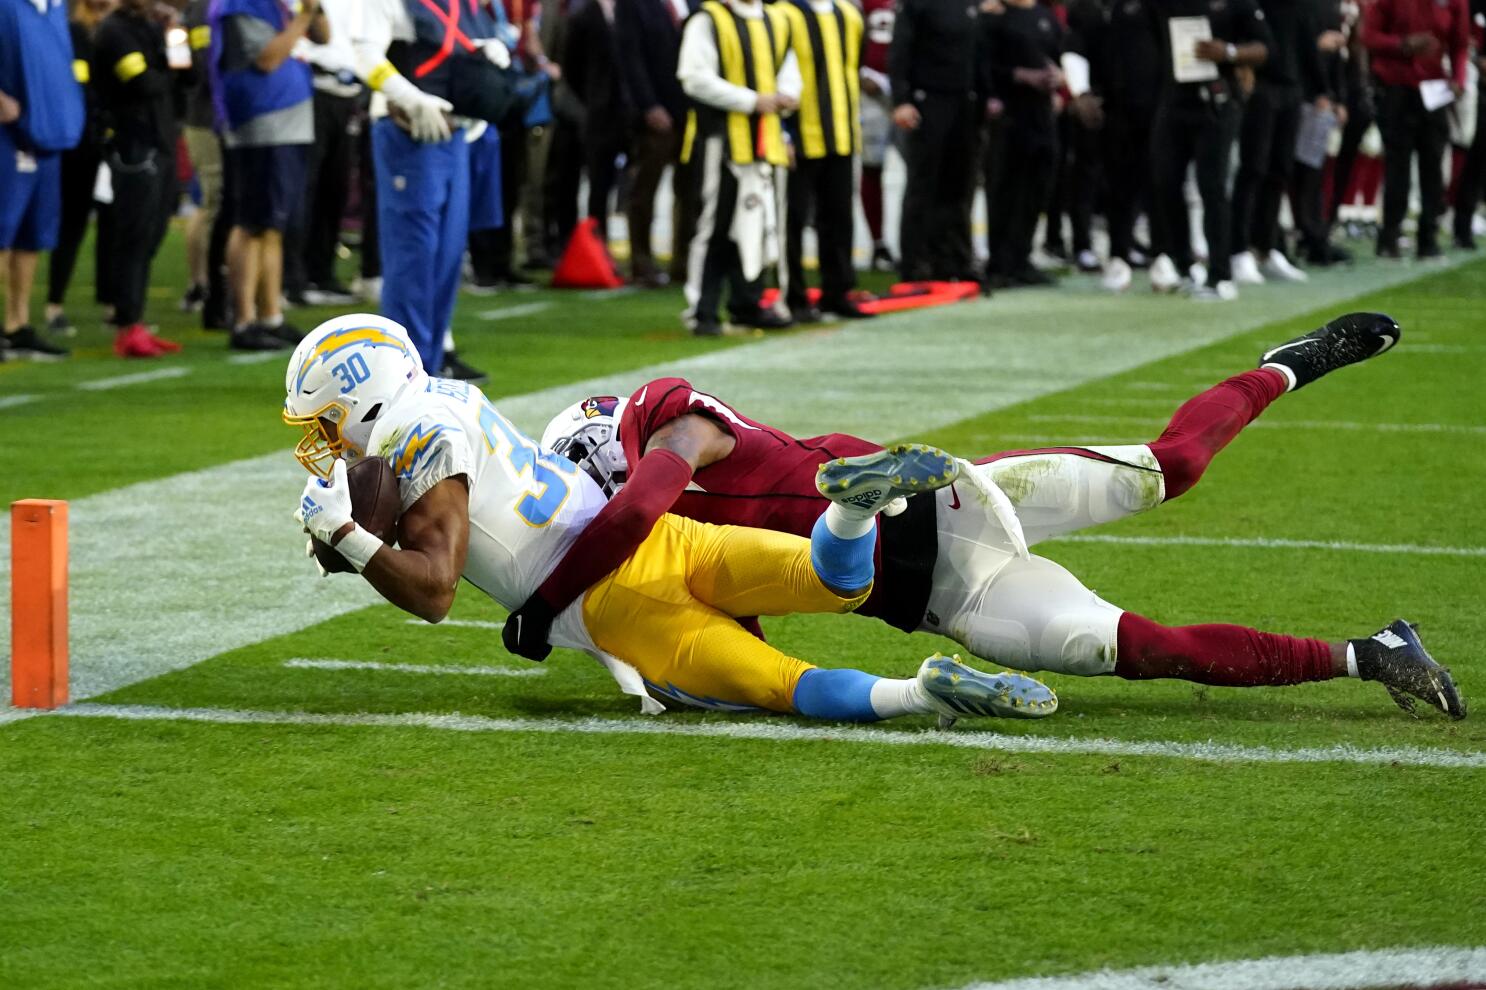 Arizona Cardinals lose at home against the Los Angeles Chargers, 25-24